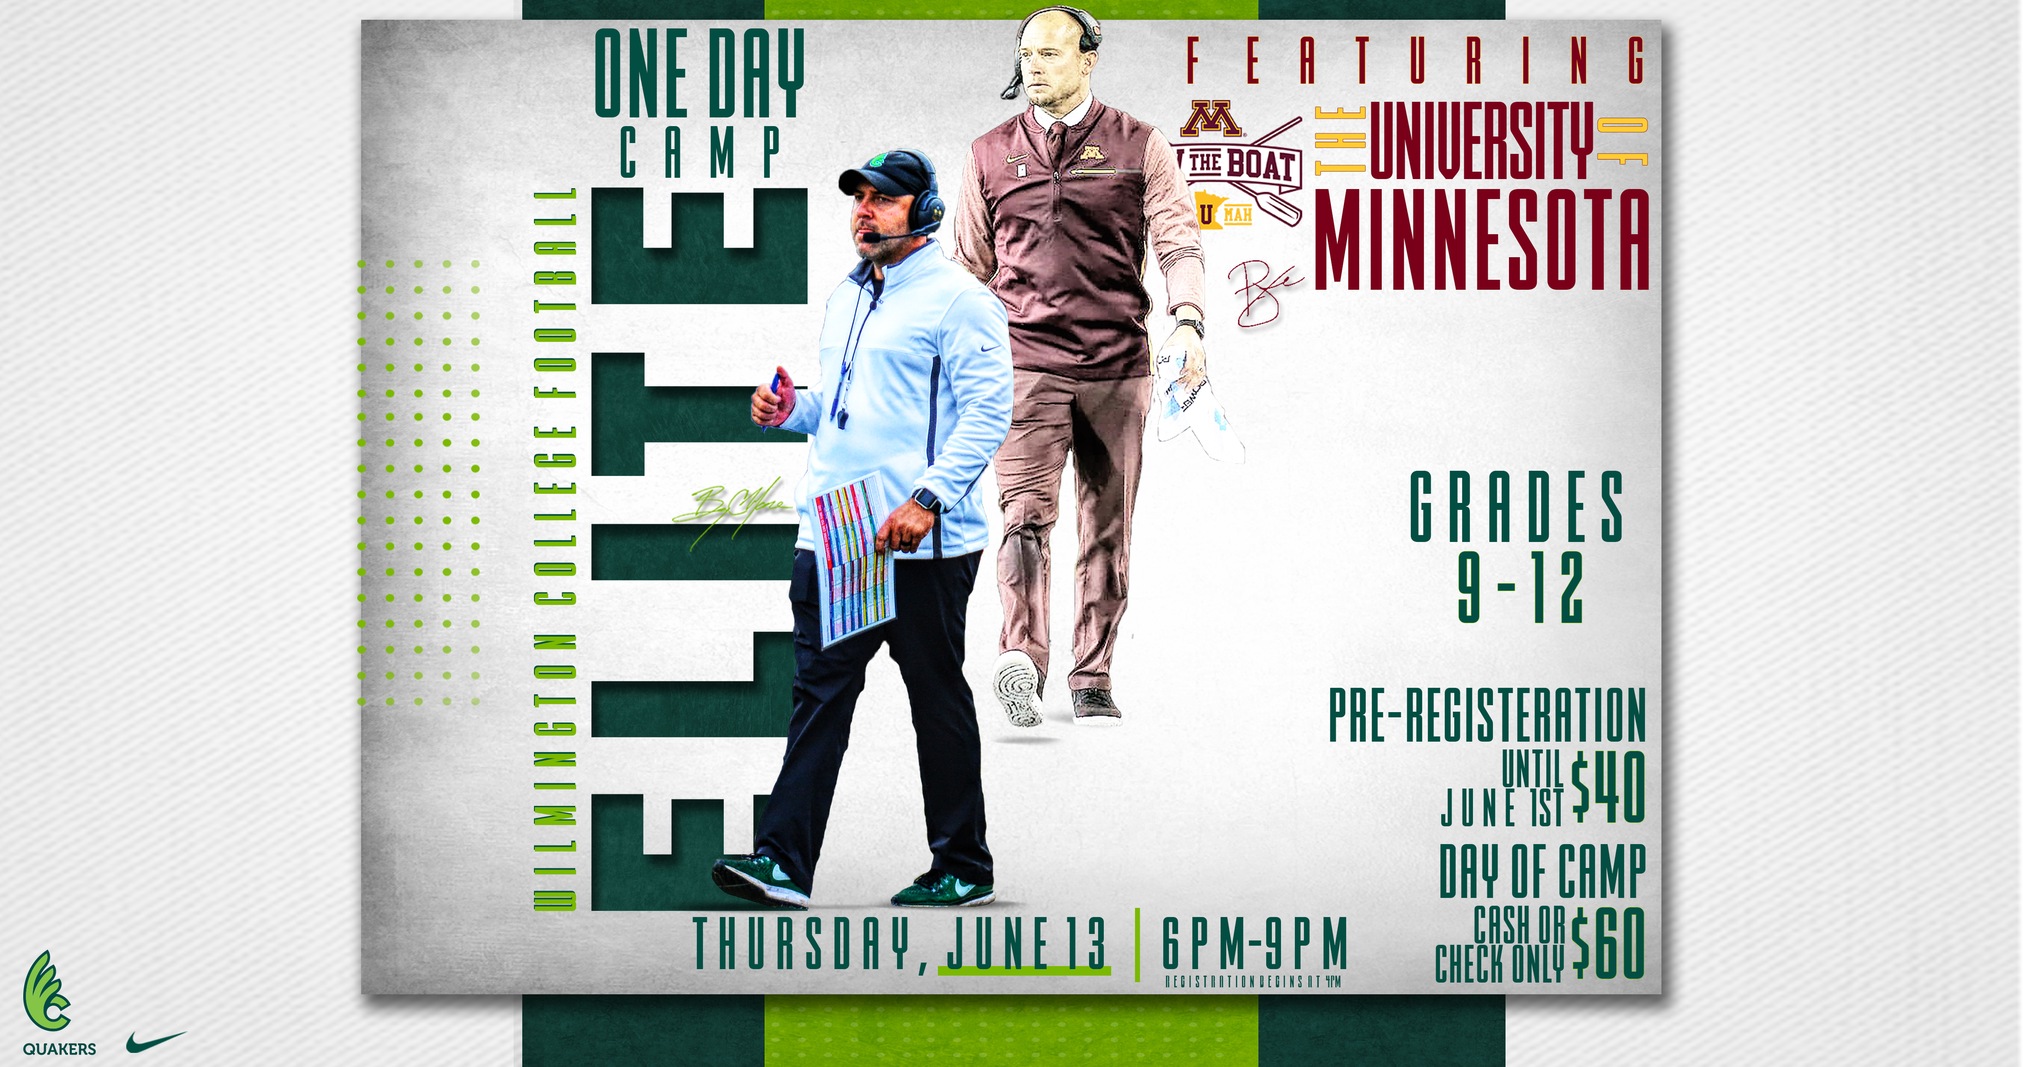 Football Hosting One-Day Elite Camp Featuring Minnesota for Second Consecutive Year